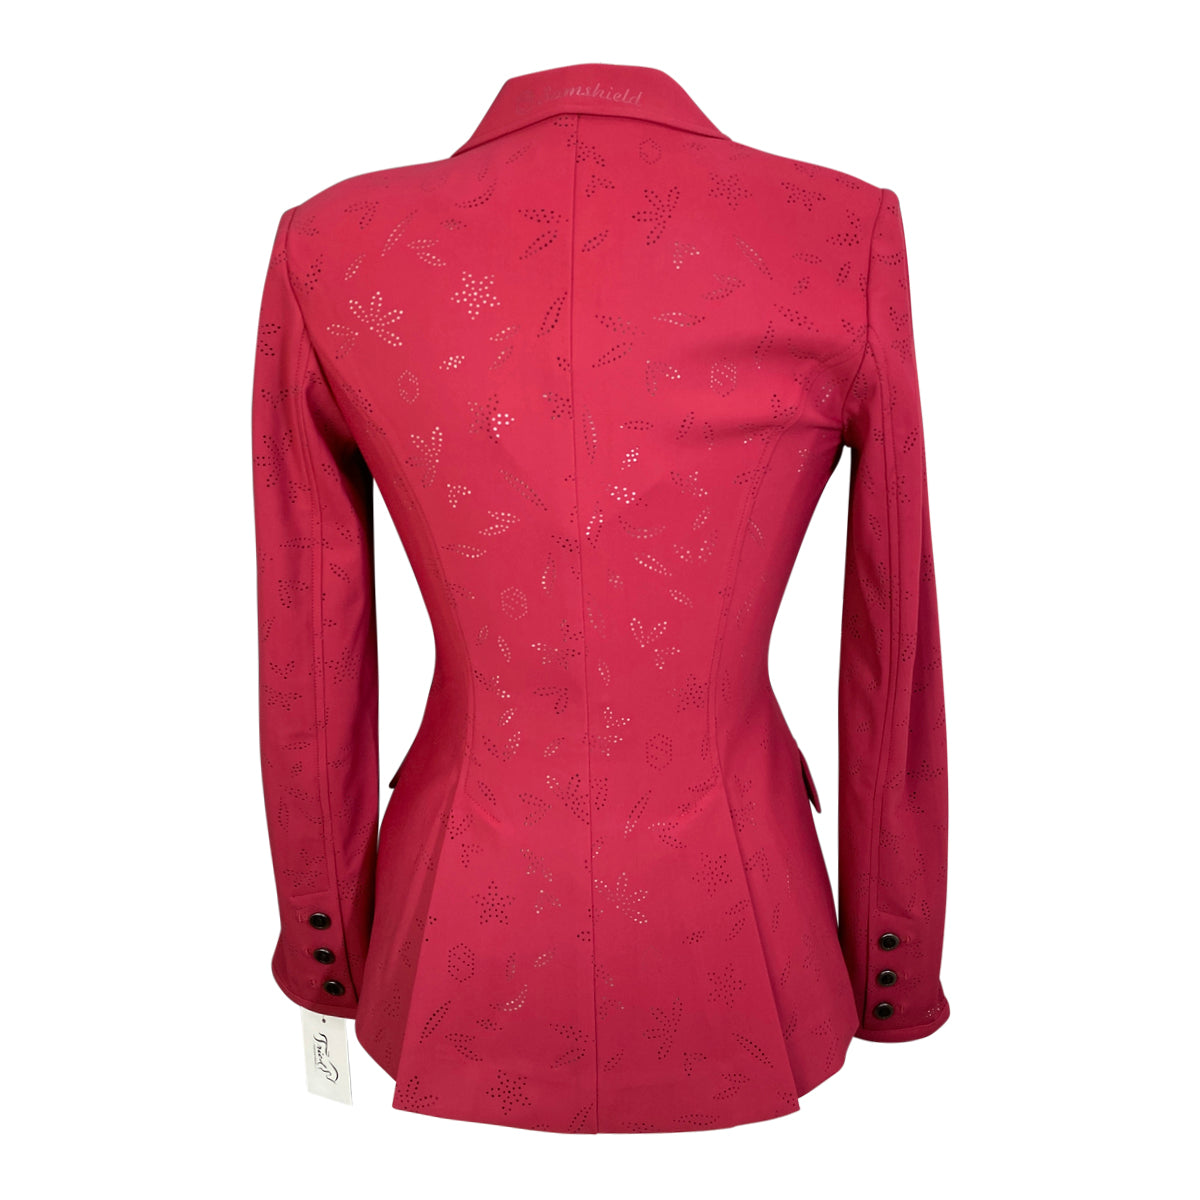 Samshield 'Alix Air' Show Jacket in Cerise Red